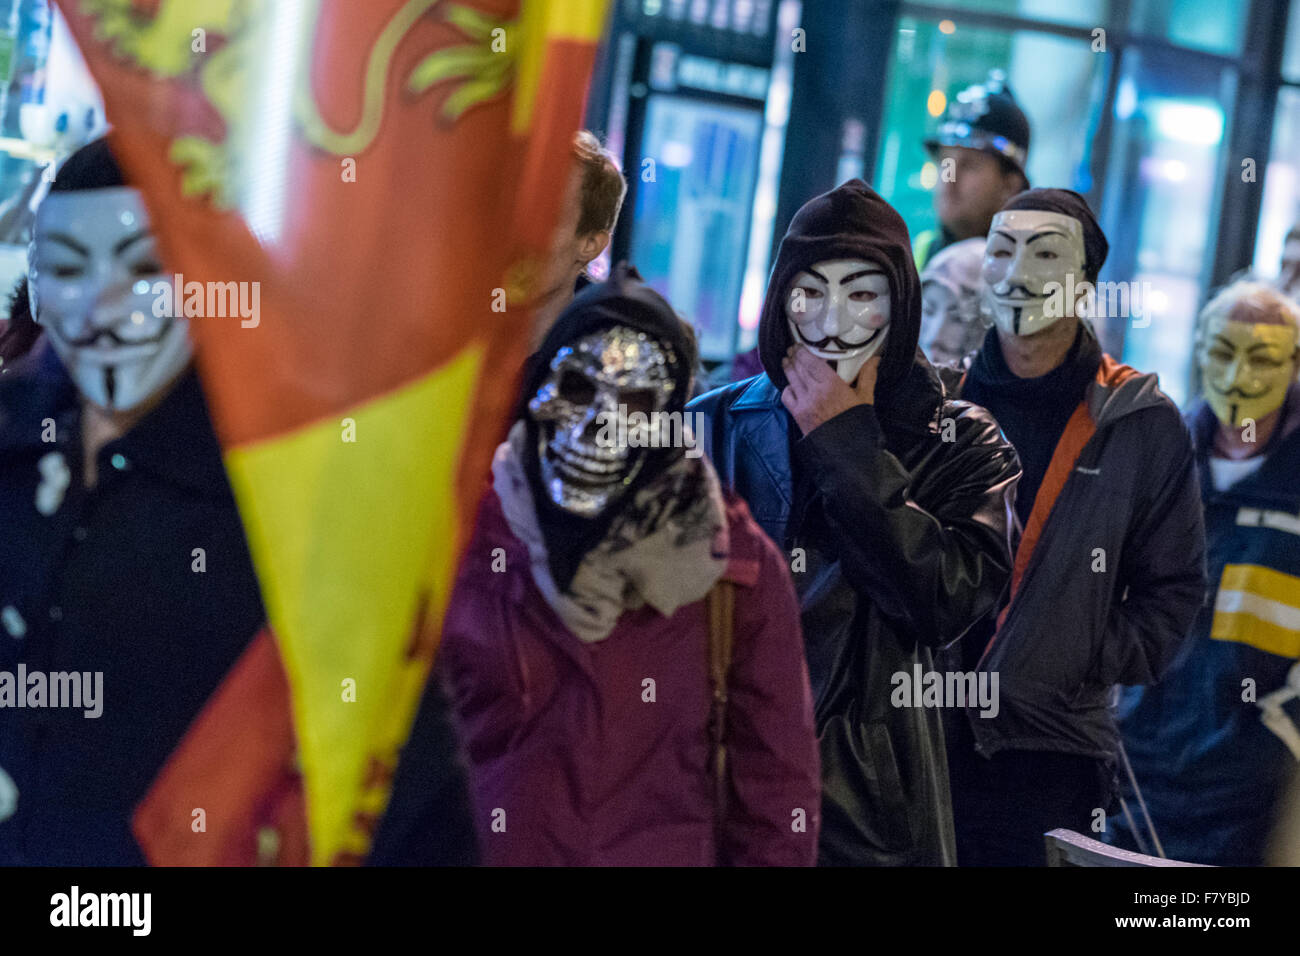 City Centre, Cardiff, Wales, UK, November 5, 2015: Anonymous activists gathers in front of Aneurin Bevan statue. Stock Photo